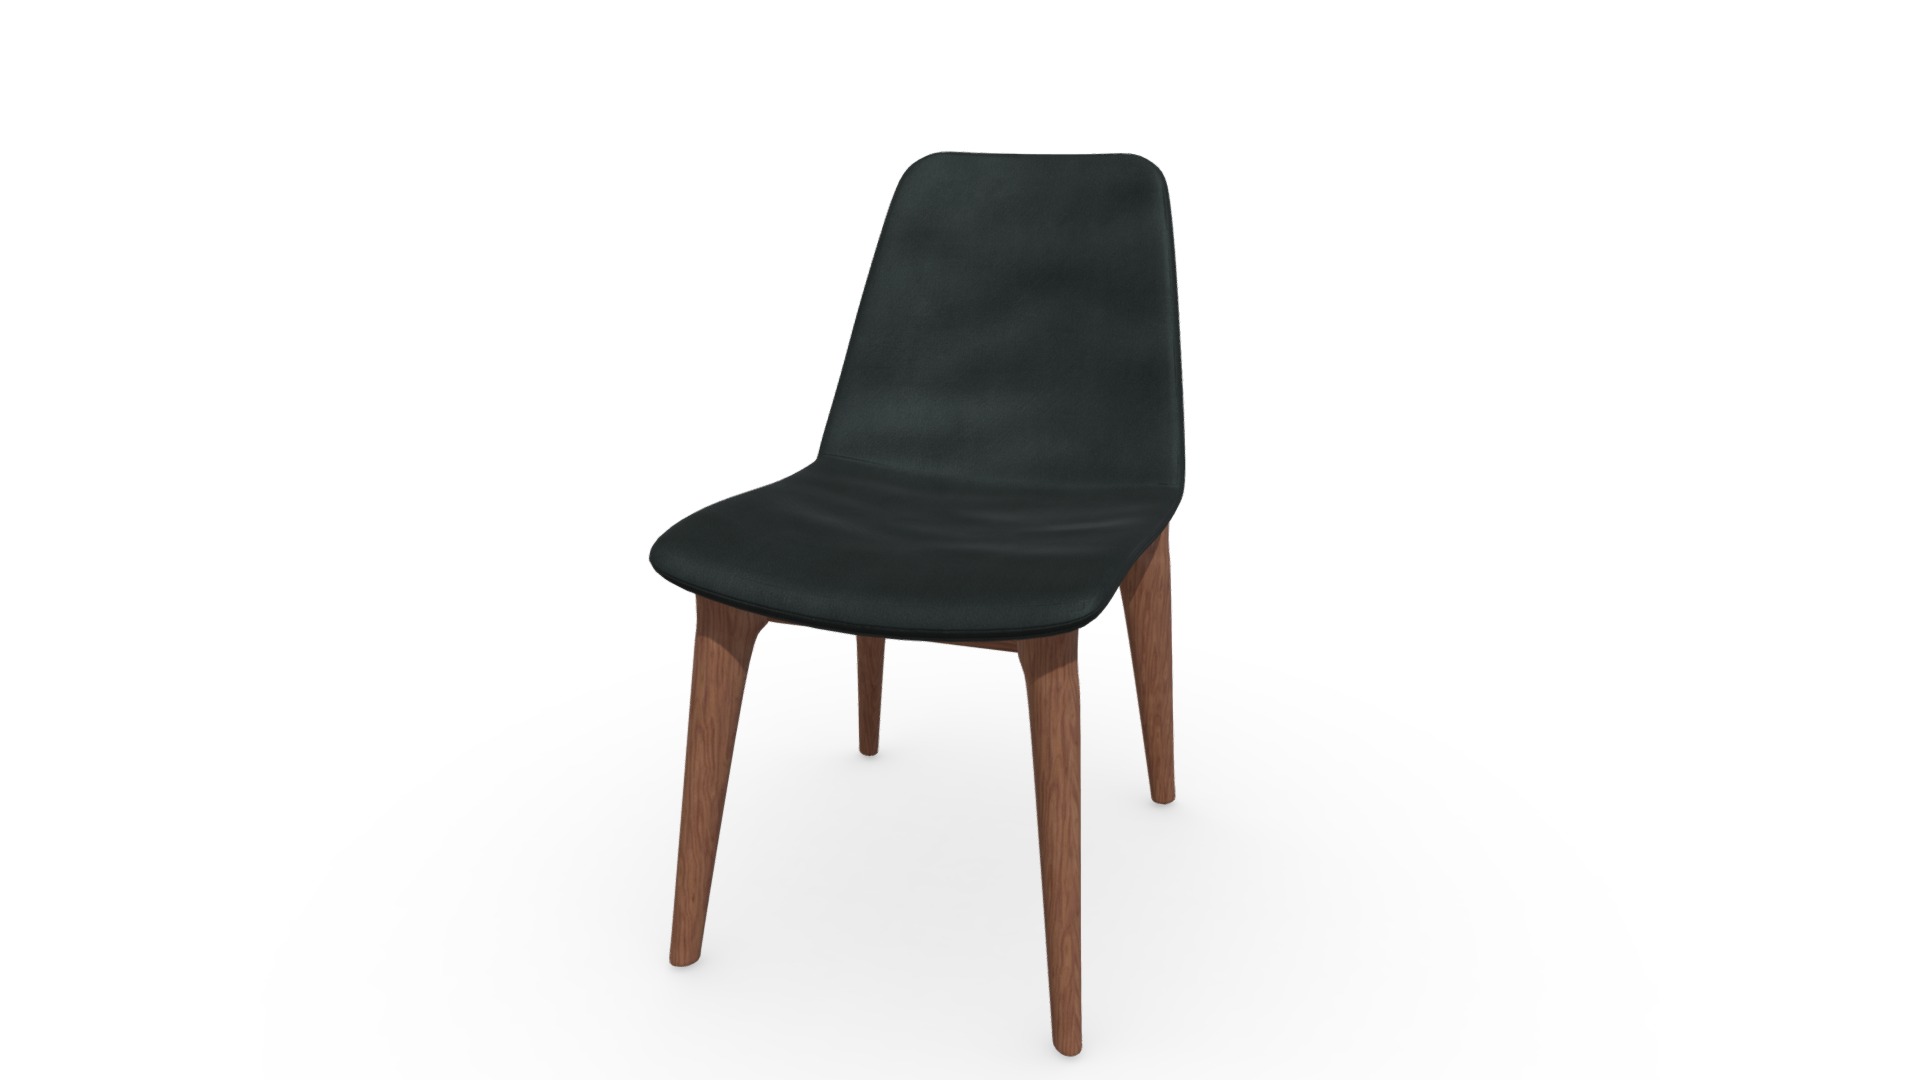 3D model Vine Dining Chair, Midnight Grey Velvet - This is a 3D model of the Vine Dining Chair, Midnight Grey Velvet. The 3D model is about a black chair with a wooden base.